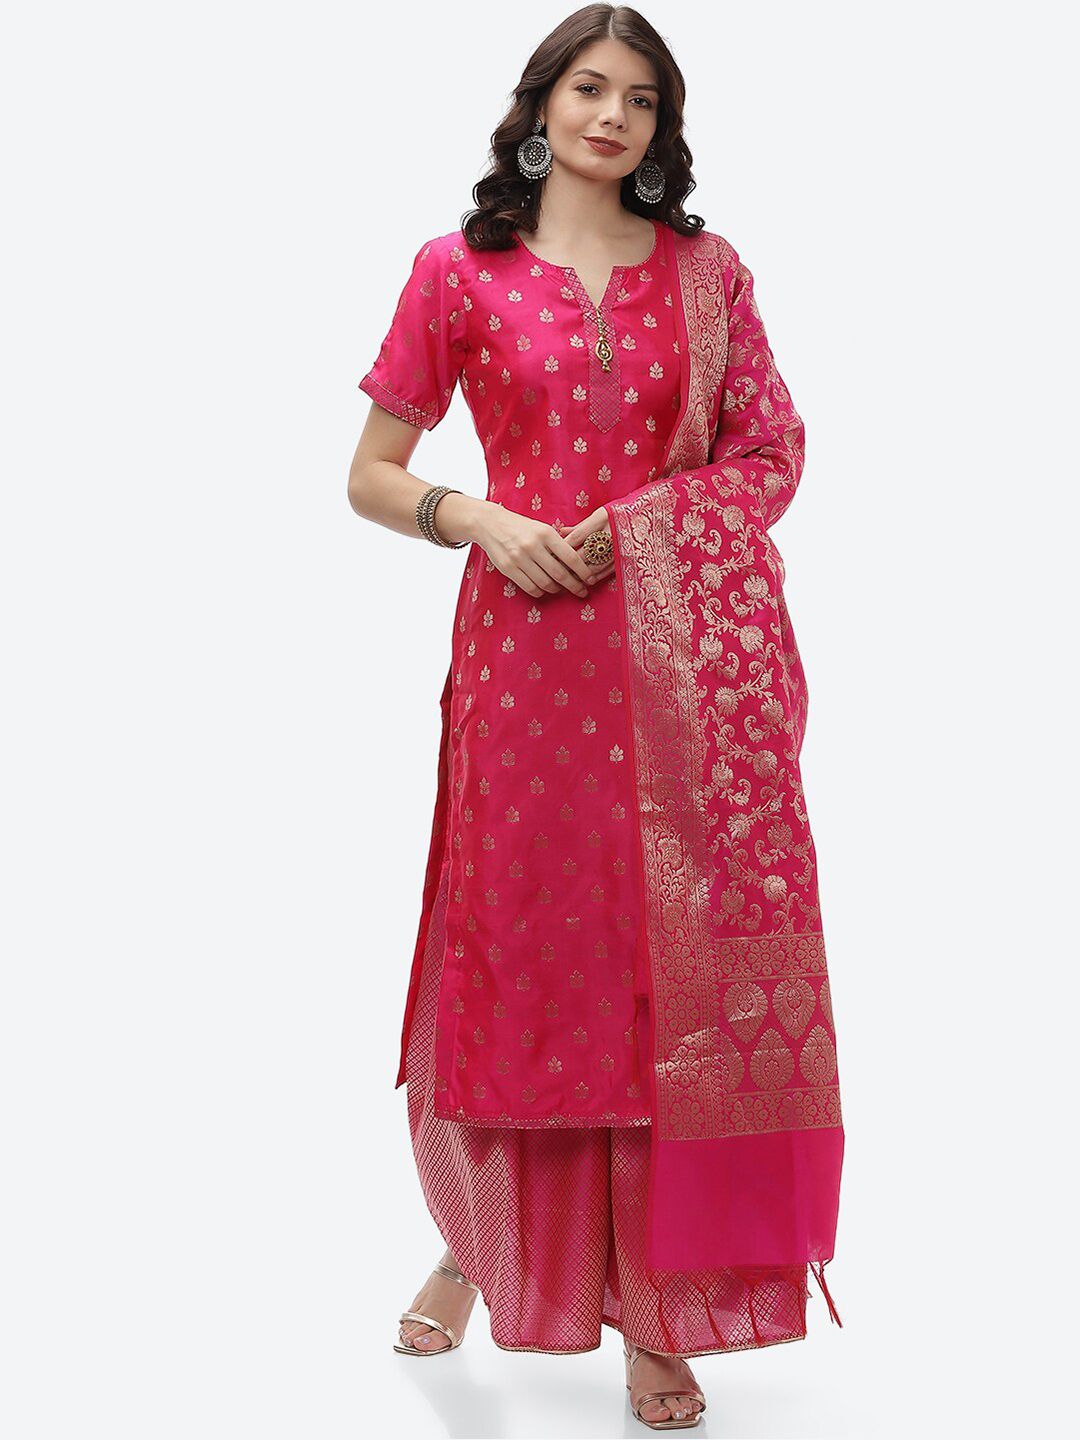 Biba Pink & Gold-Toned Unstitched Dress Material Price in India